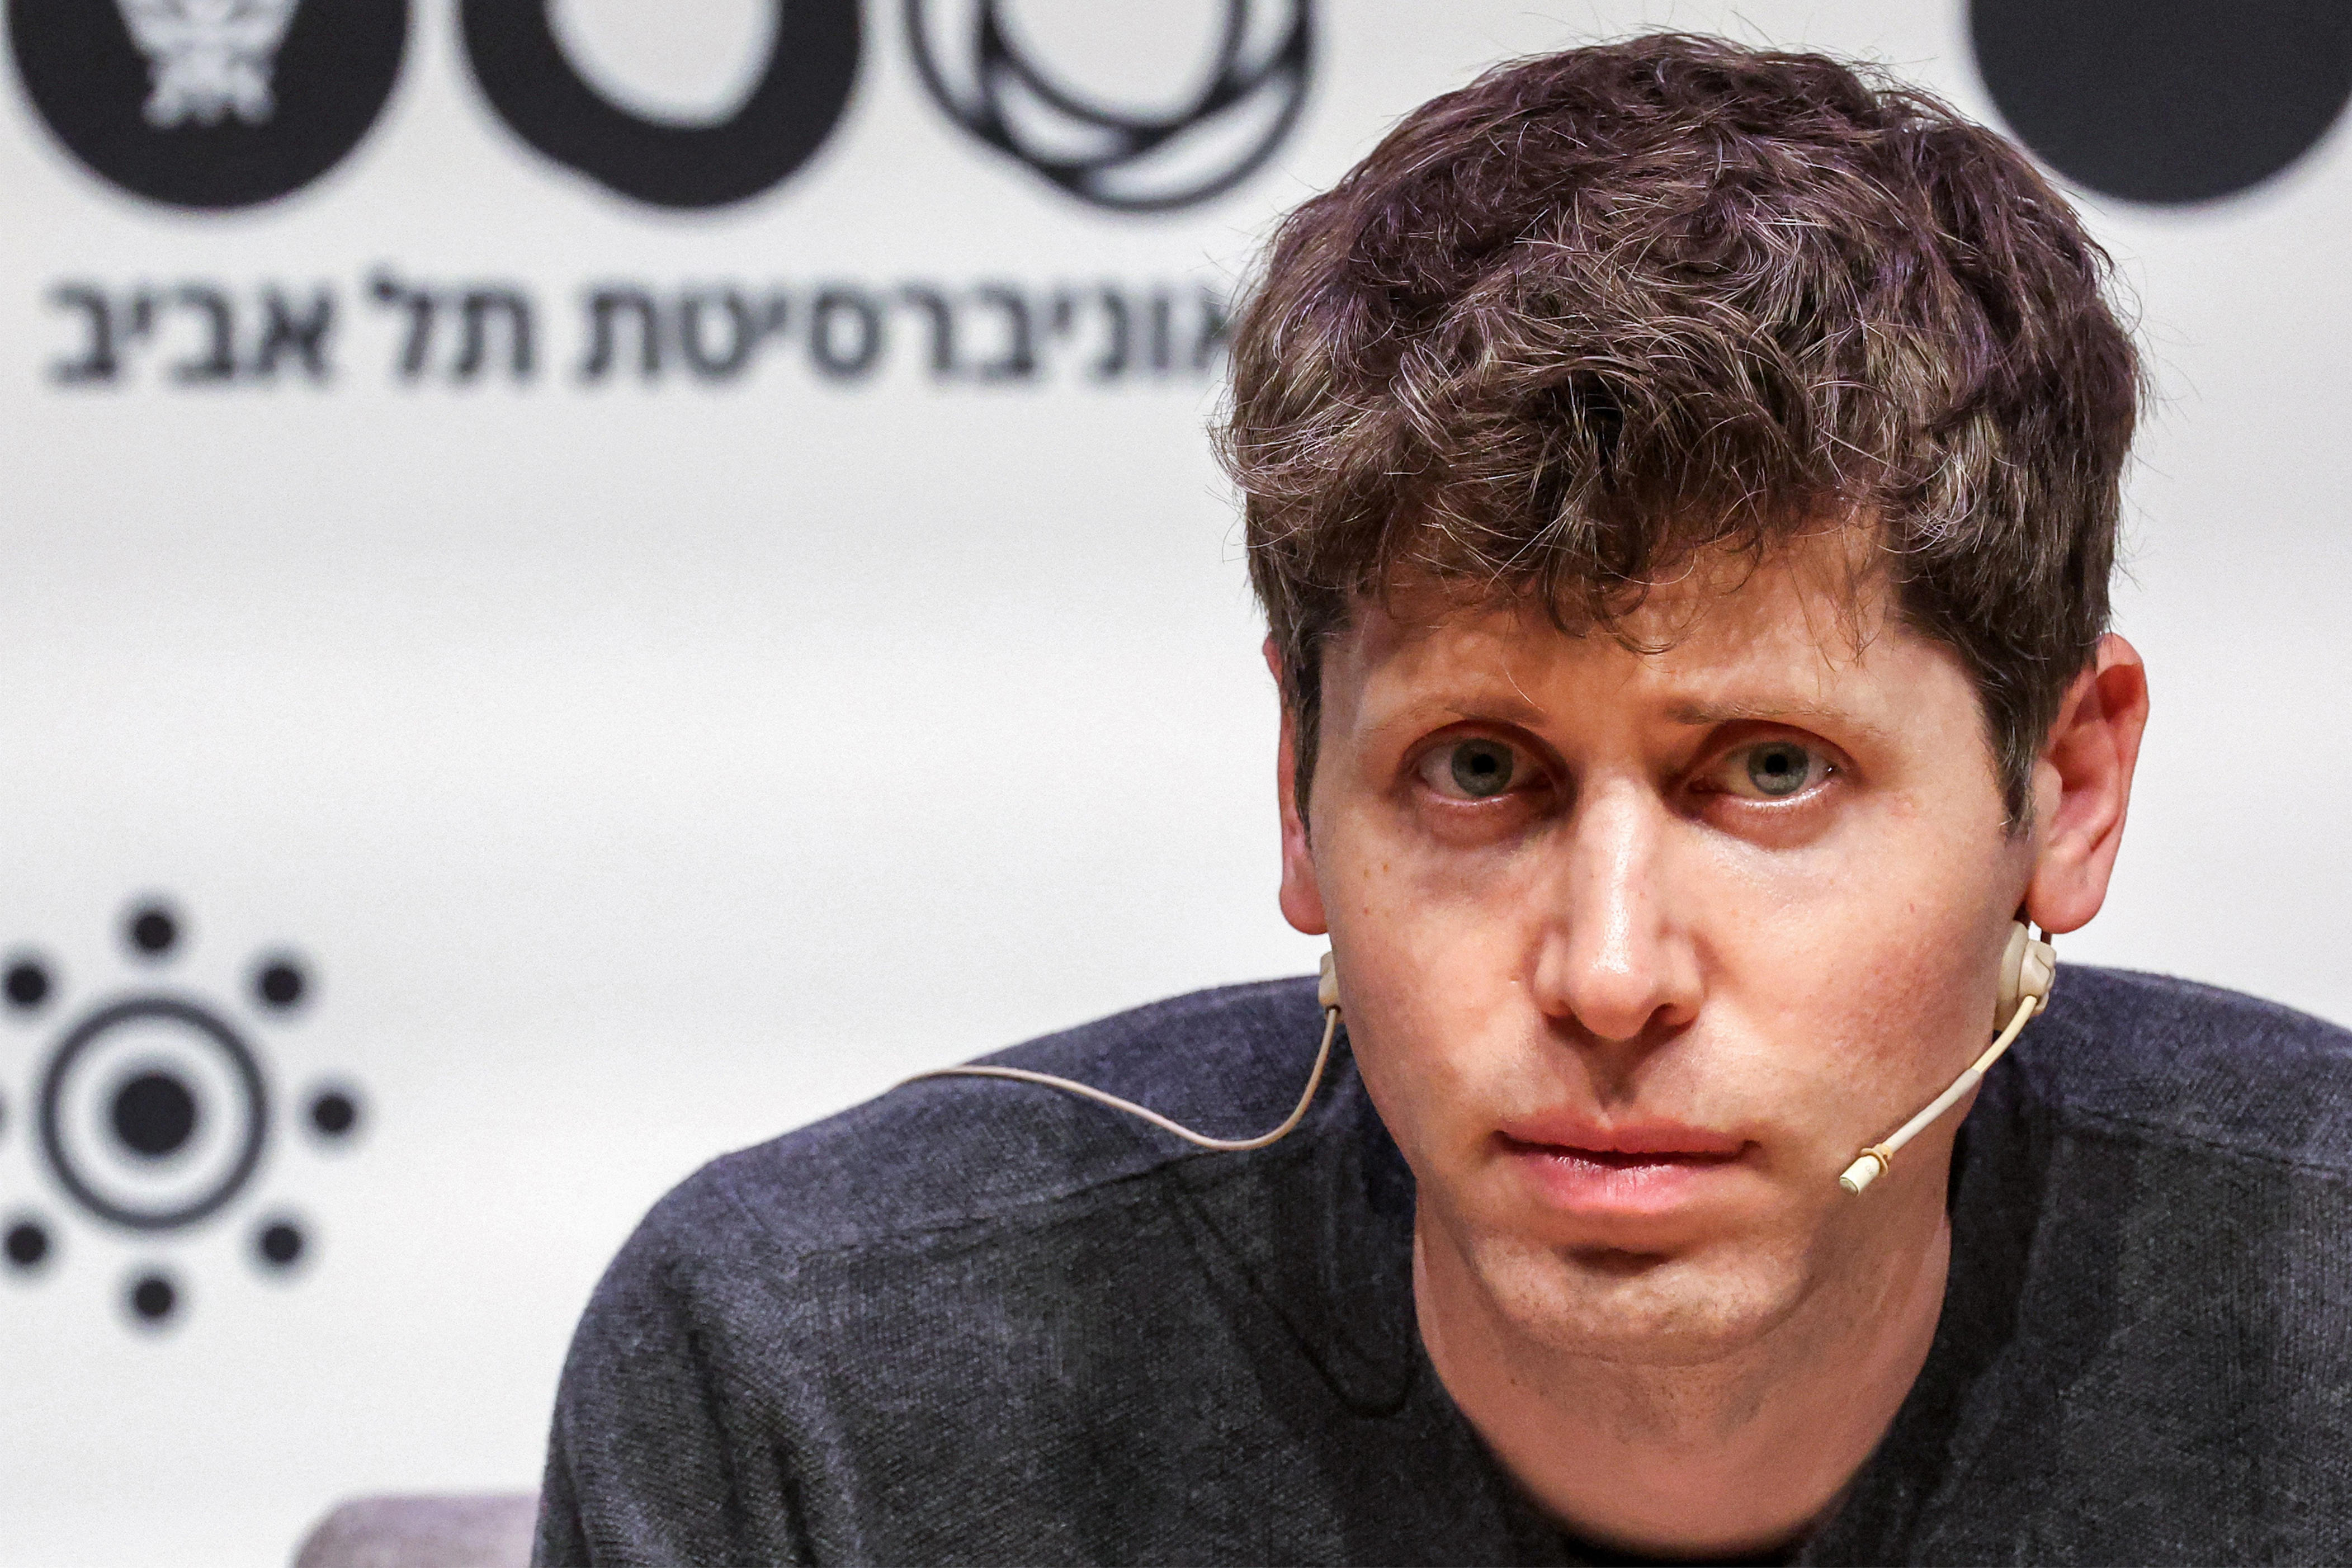 microsoft, sam altman wants to raise up to $7 trillion. that's, uh, a lot of dough.